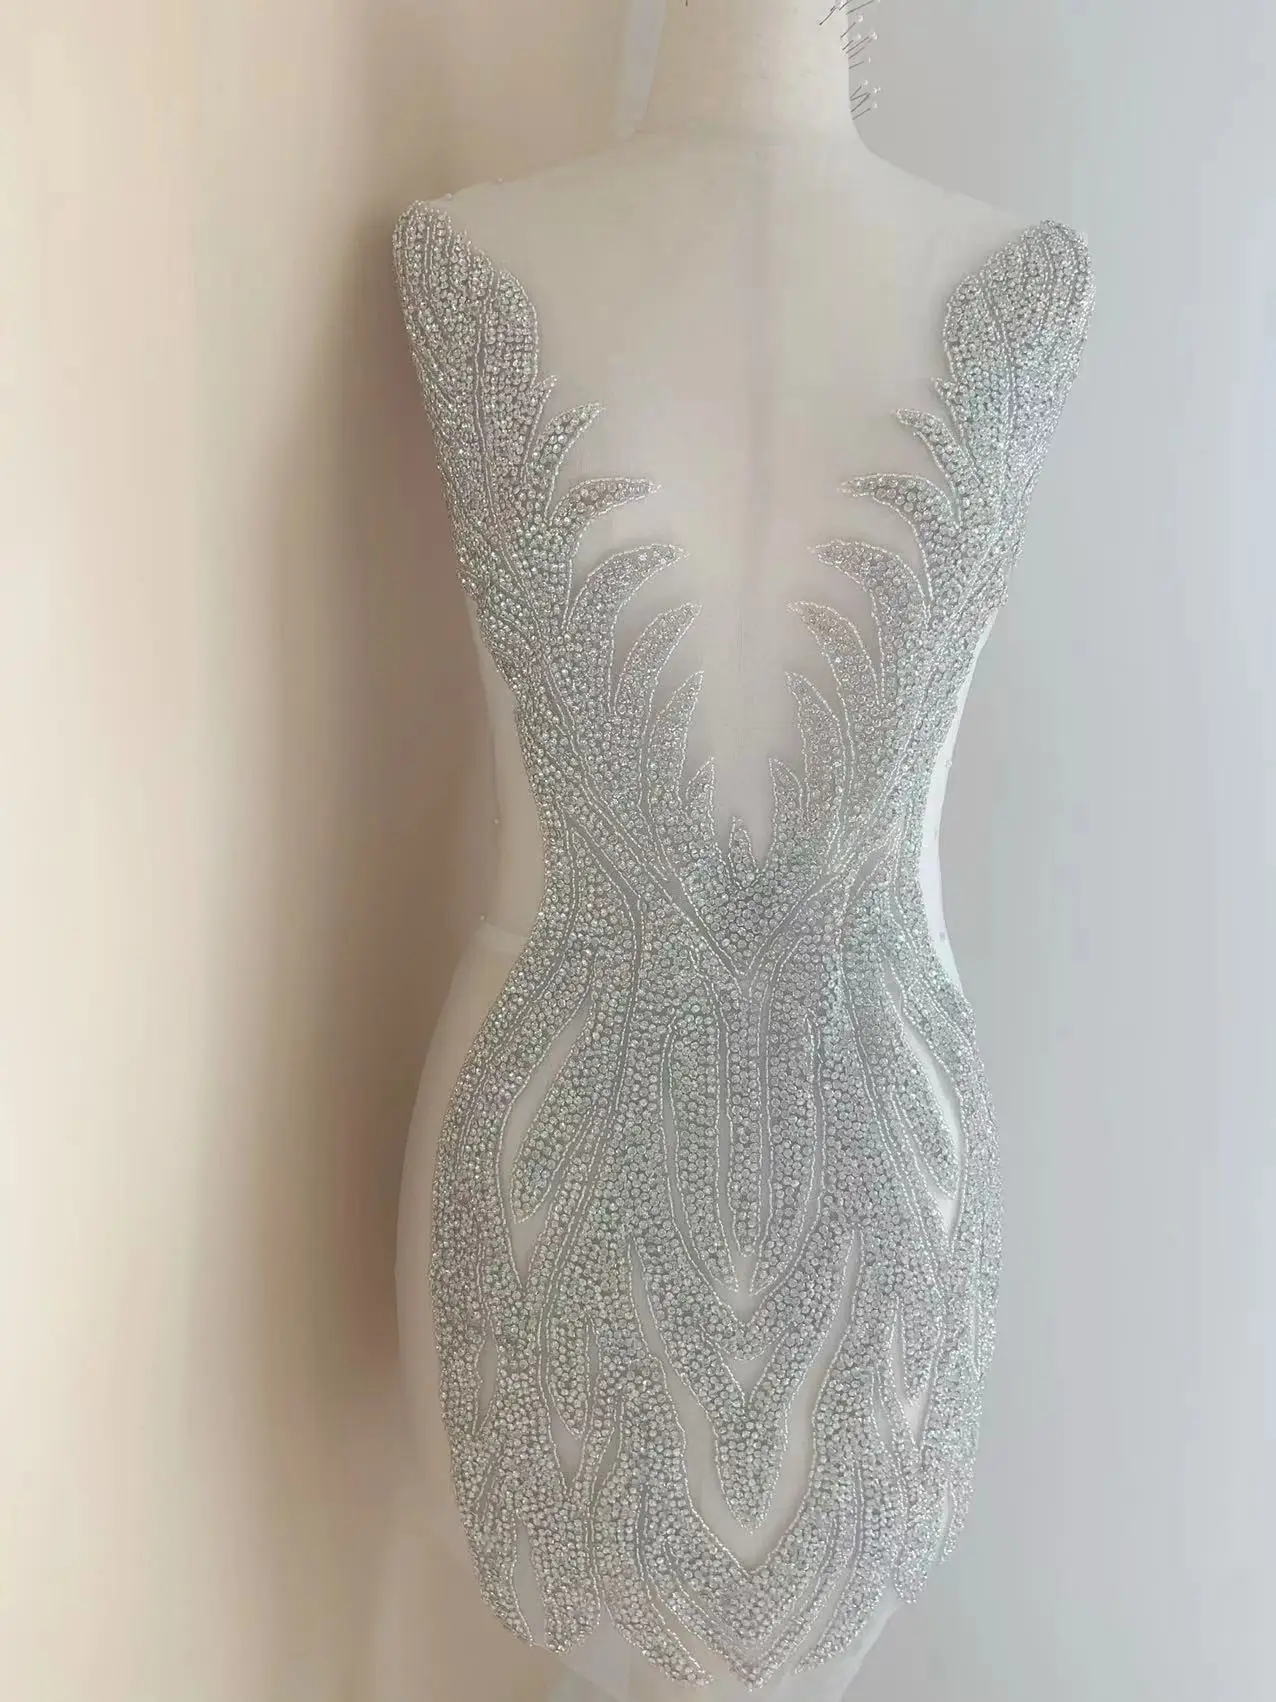 

Large Silver Rhinestone Front Patch Heavy Beaded Deep V Neckline Crystal Applique for Iridescent Couture,Wedding Dress,Ball Gown